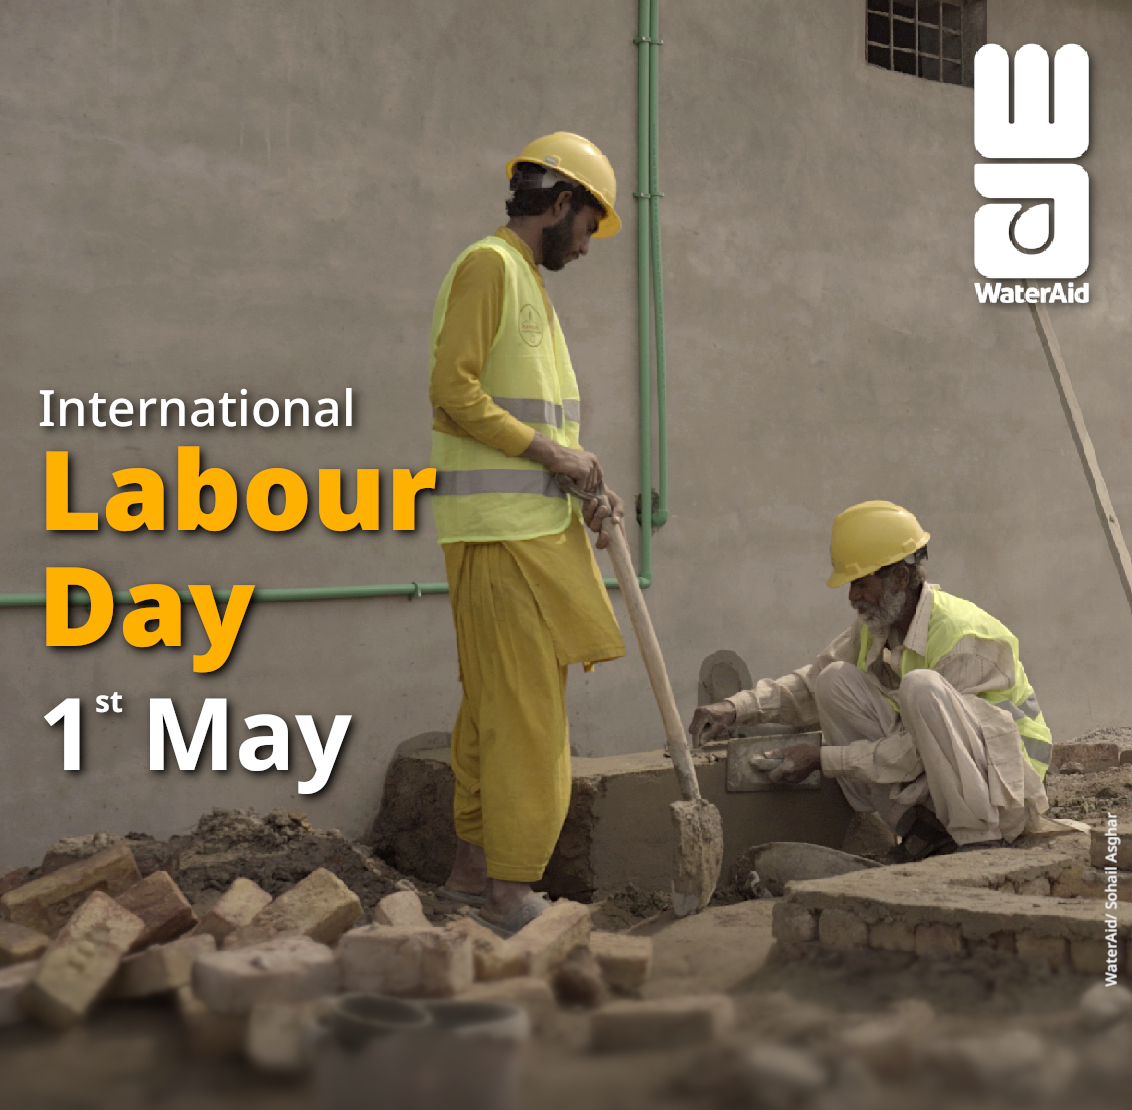 As we commemorate Labour Day, let's pledge to ensure that every worker has access to clean water, sanitation, and hygiene for a healthier and more productive workforce. #WaterAidPakistan #LabourDay #WASH @wateraid @WaterAidUK @WaterAidPress